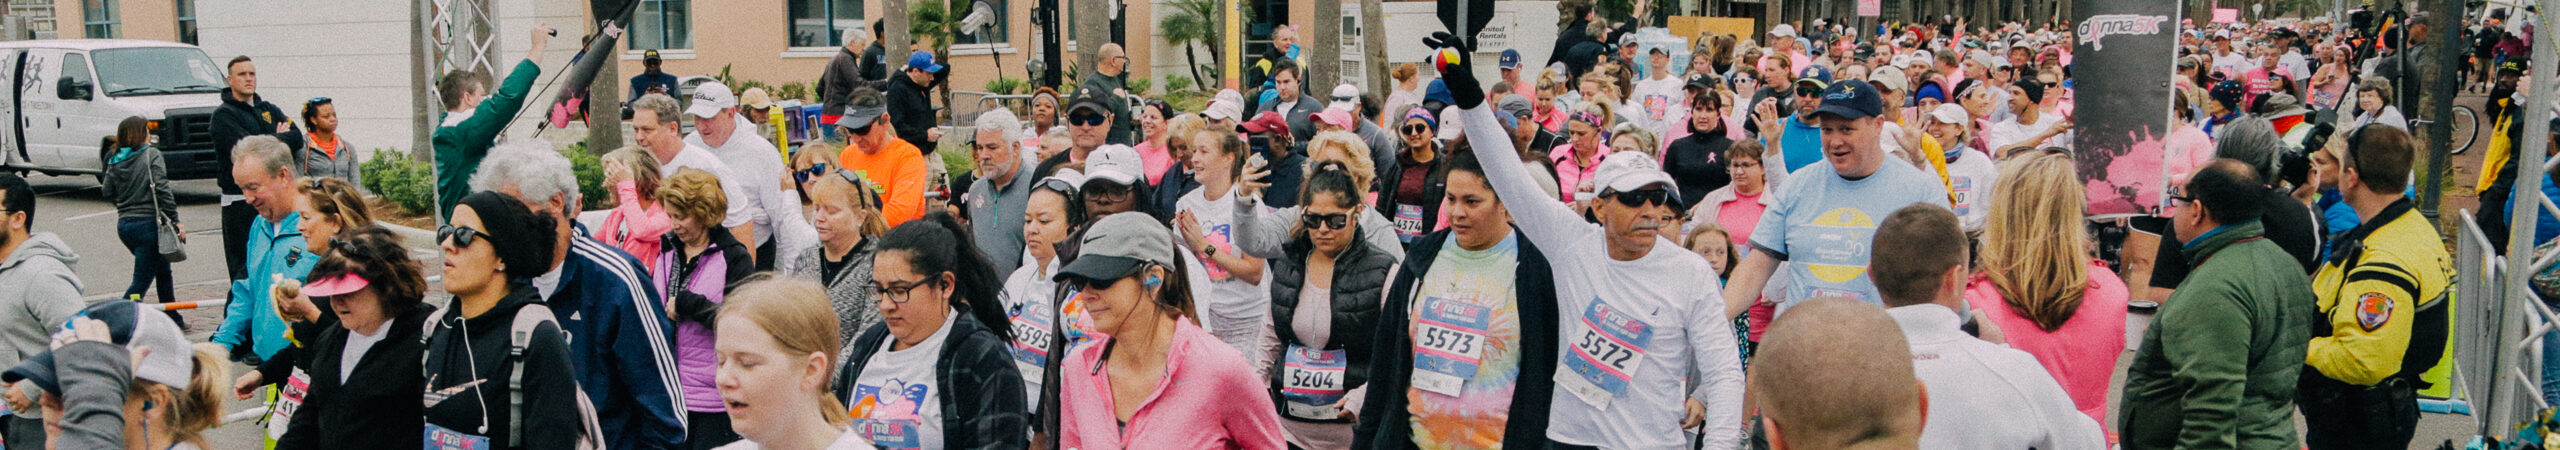 2019 Donna 5k Run and Expo